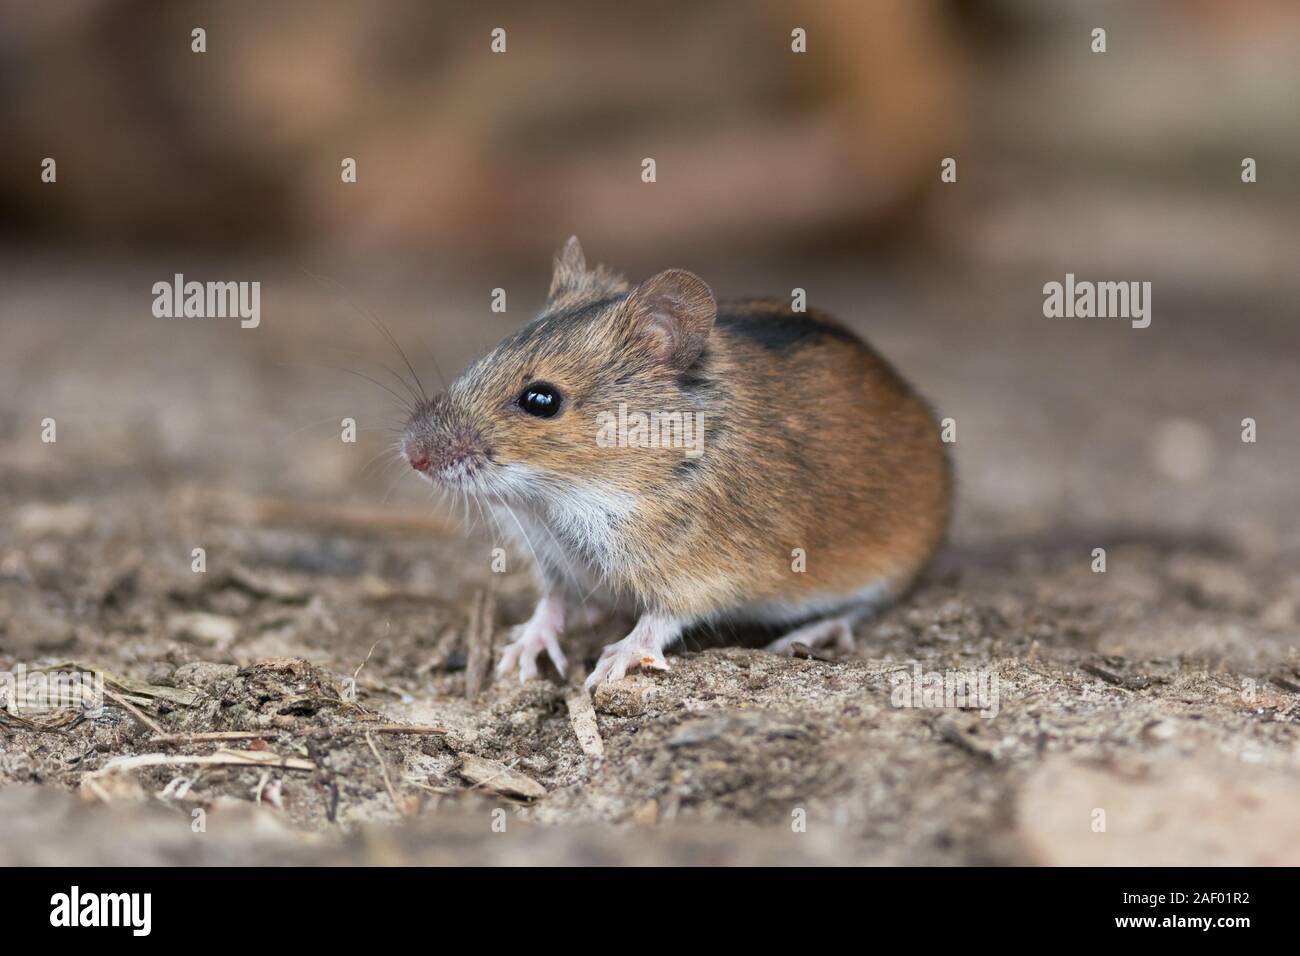 The striped field mouse (Apodemus agrarius) is a rodent in the family Muridae. Photo was taken in Ukraine Stock Photo